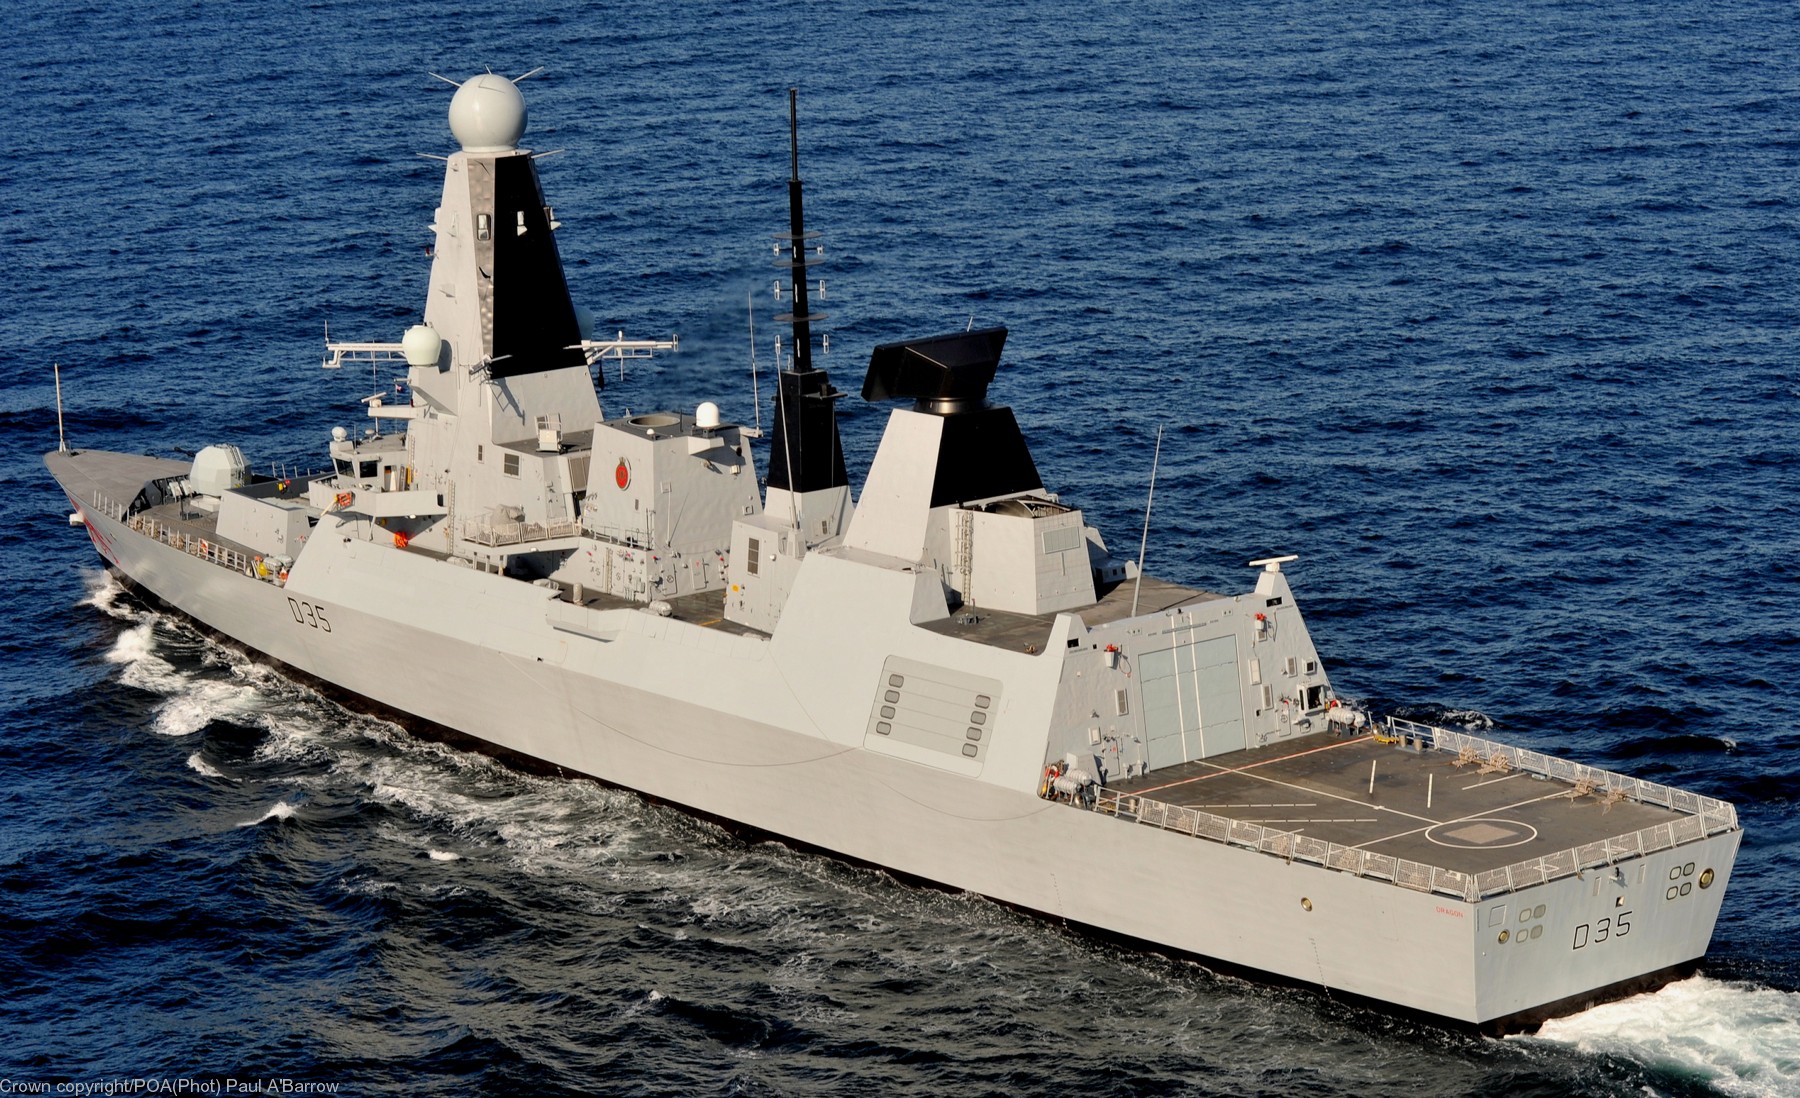 hms dragon d-35 type 45 daring class guided missile destroyer ddg royal navy sea viper paams 13